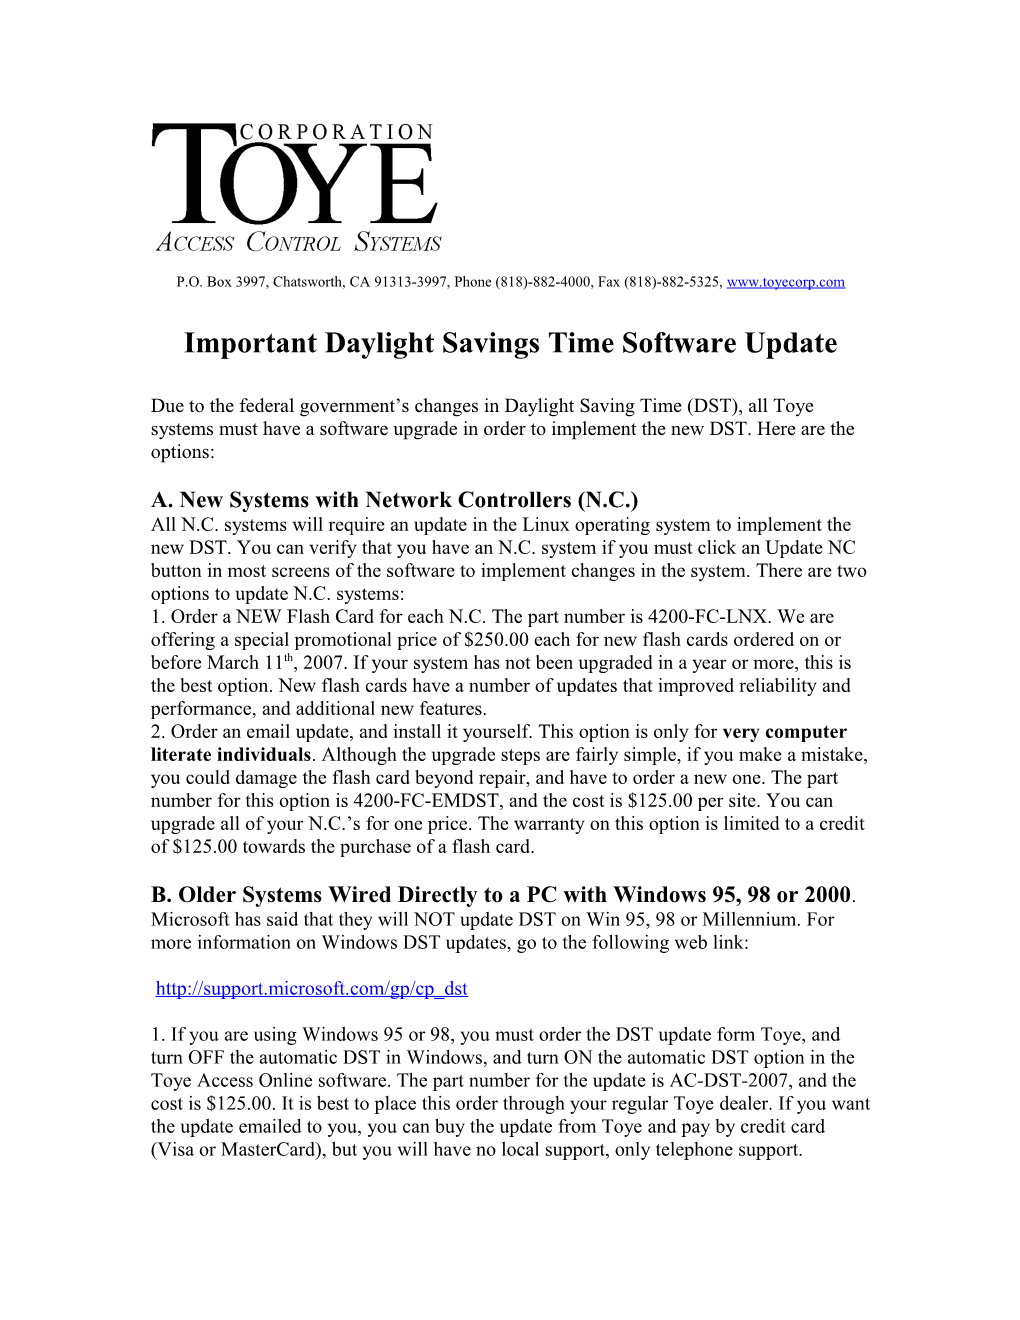 Important Daylight Savings Time Software Update